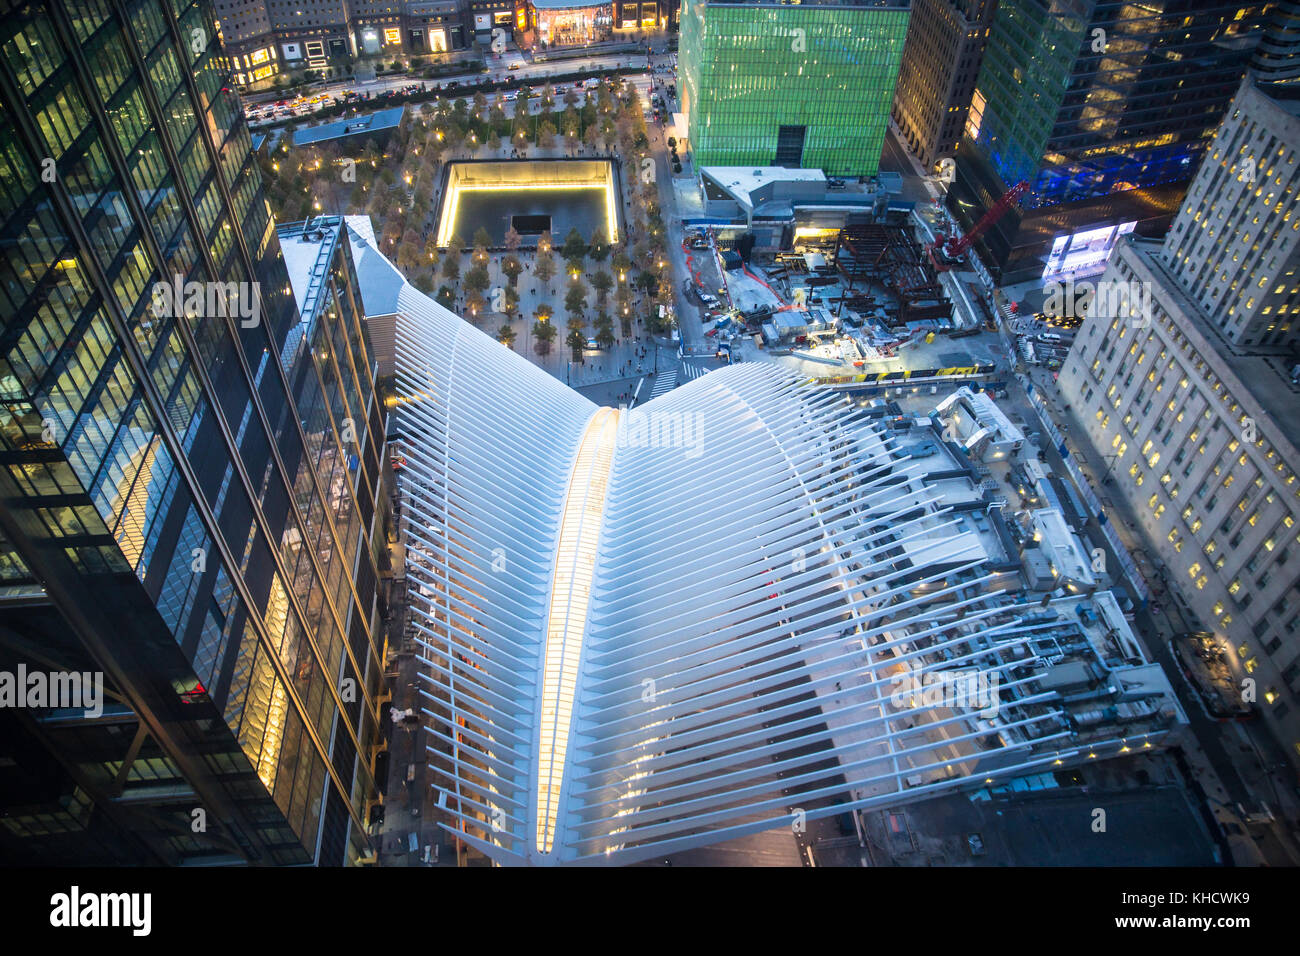 Night View of The World Trade Center in lower Manhattan seen from above with buildings and Oculus in view Stock Photo